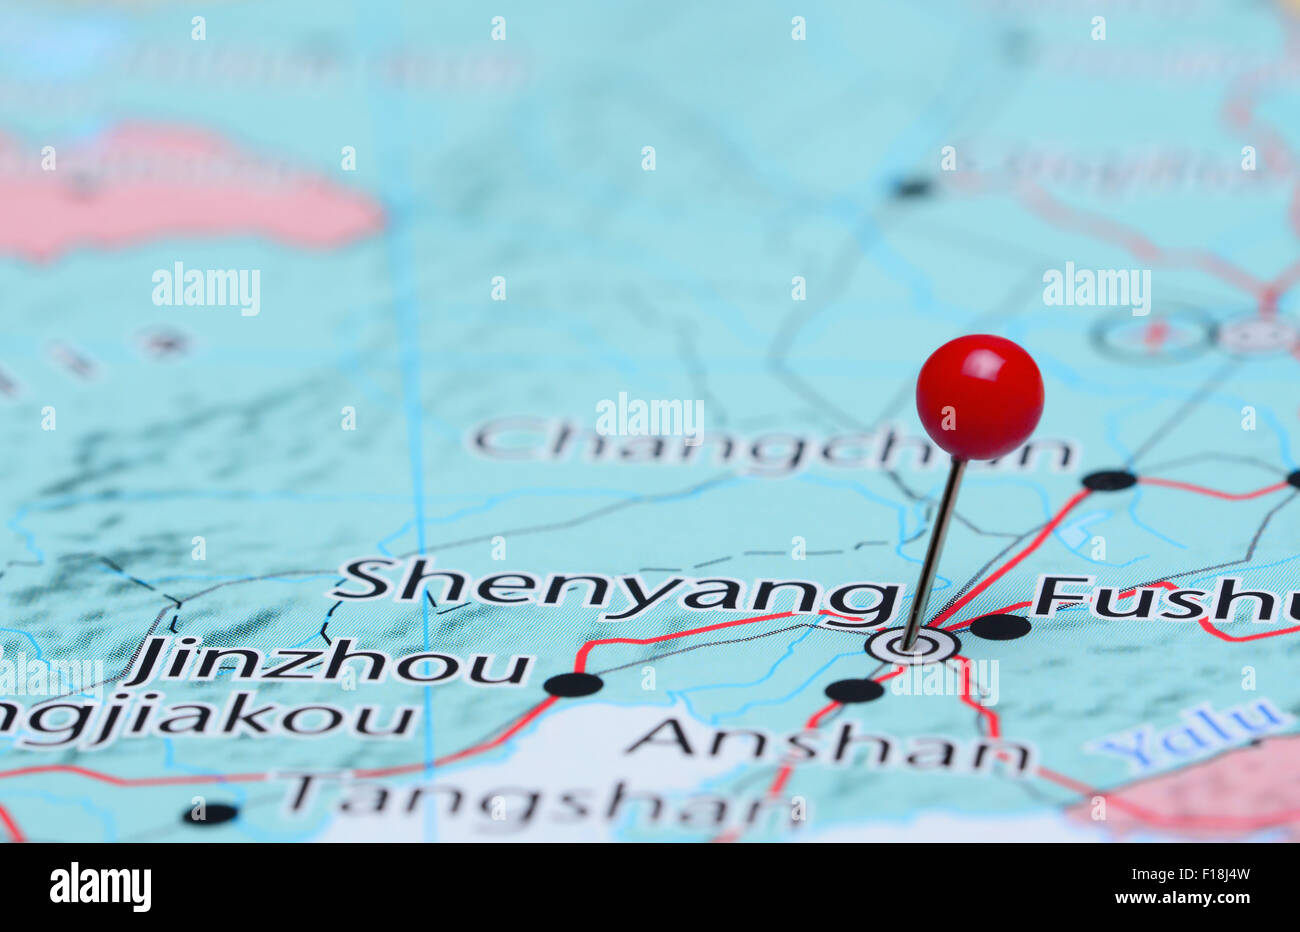 Shenyang pinned on a map of Asia Stock Photo